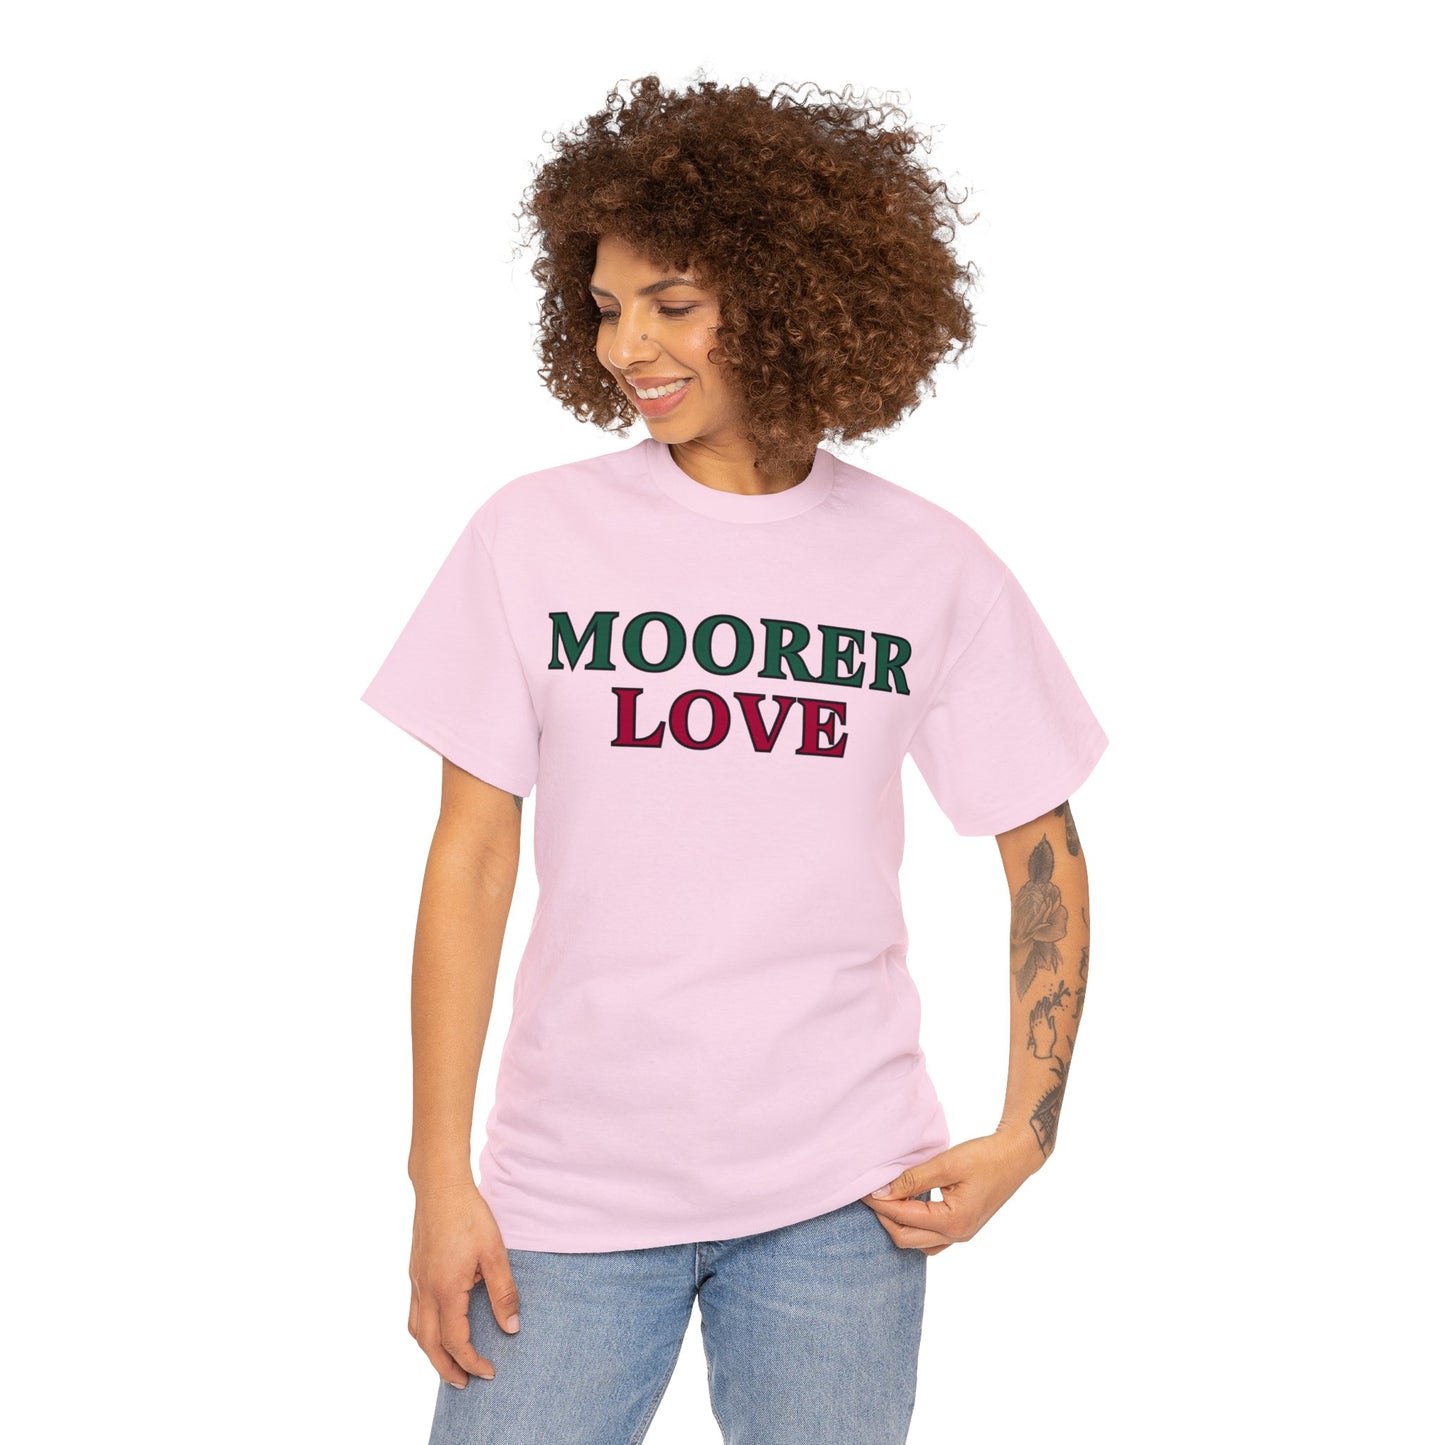 MMLove T-shirt (Be Moorer Special Collection)